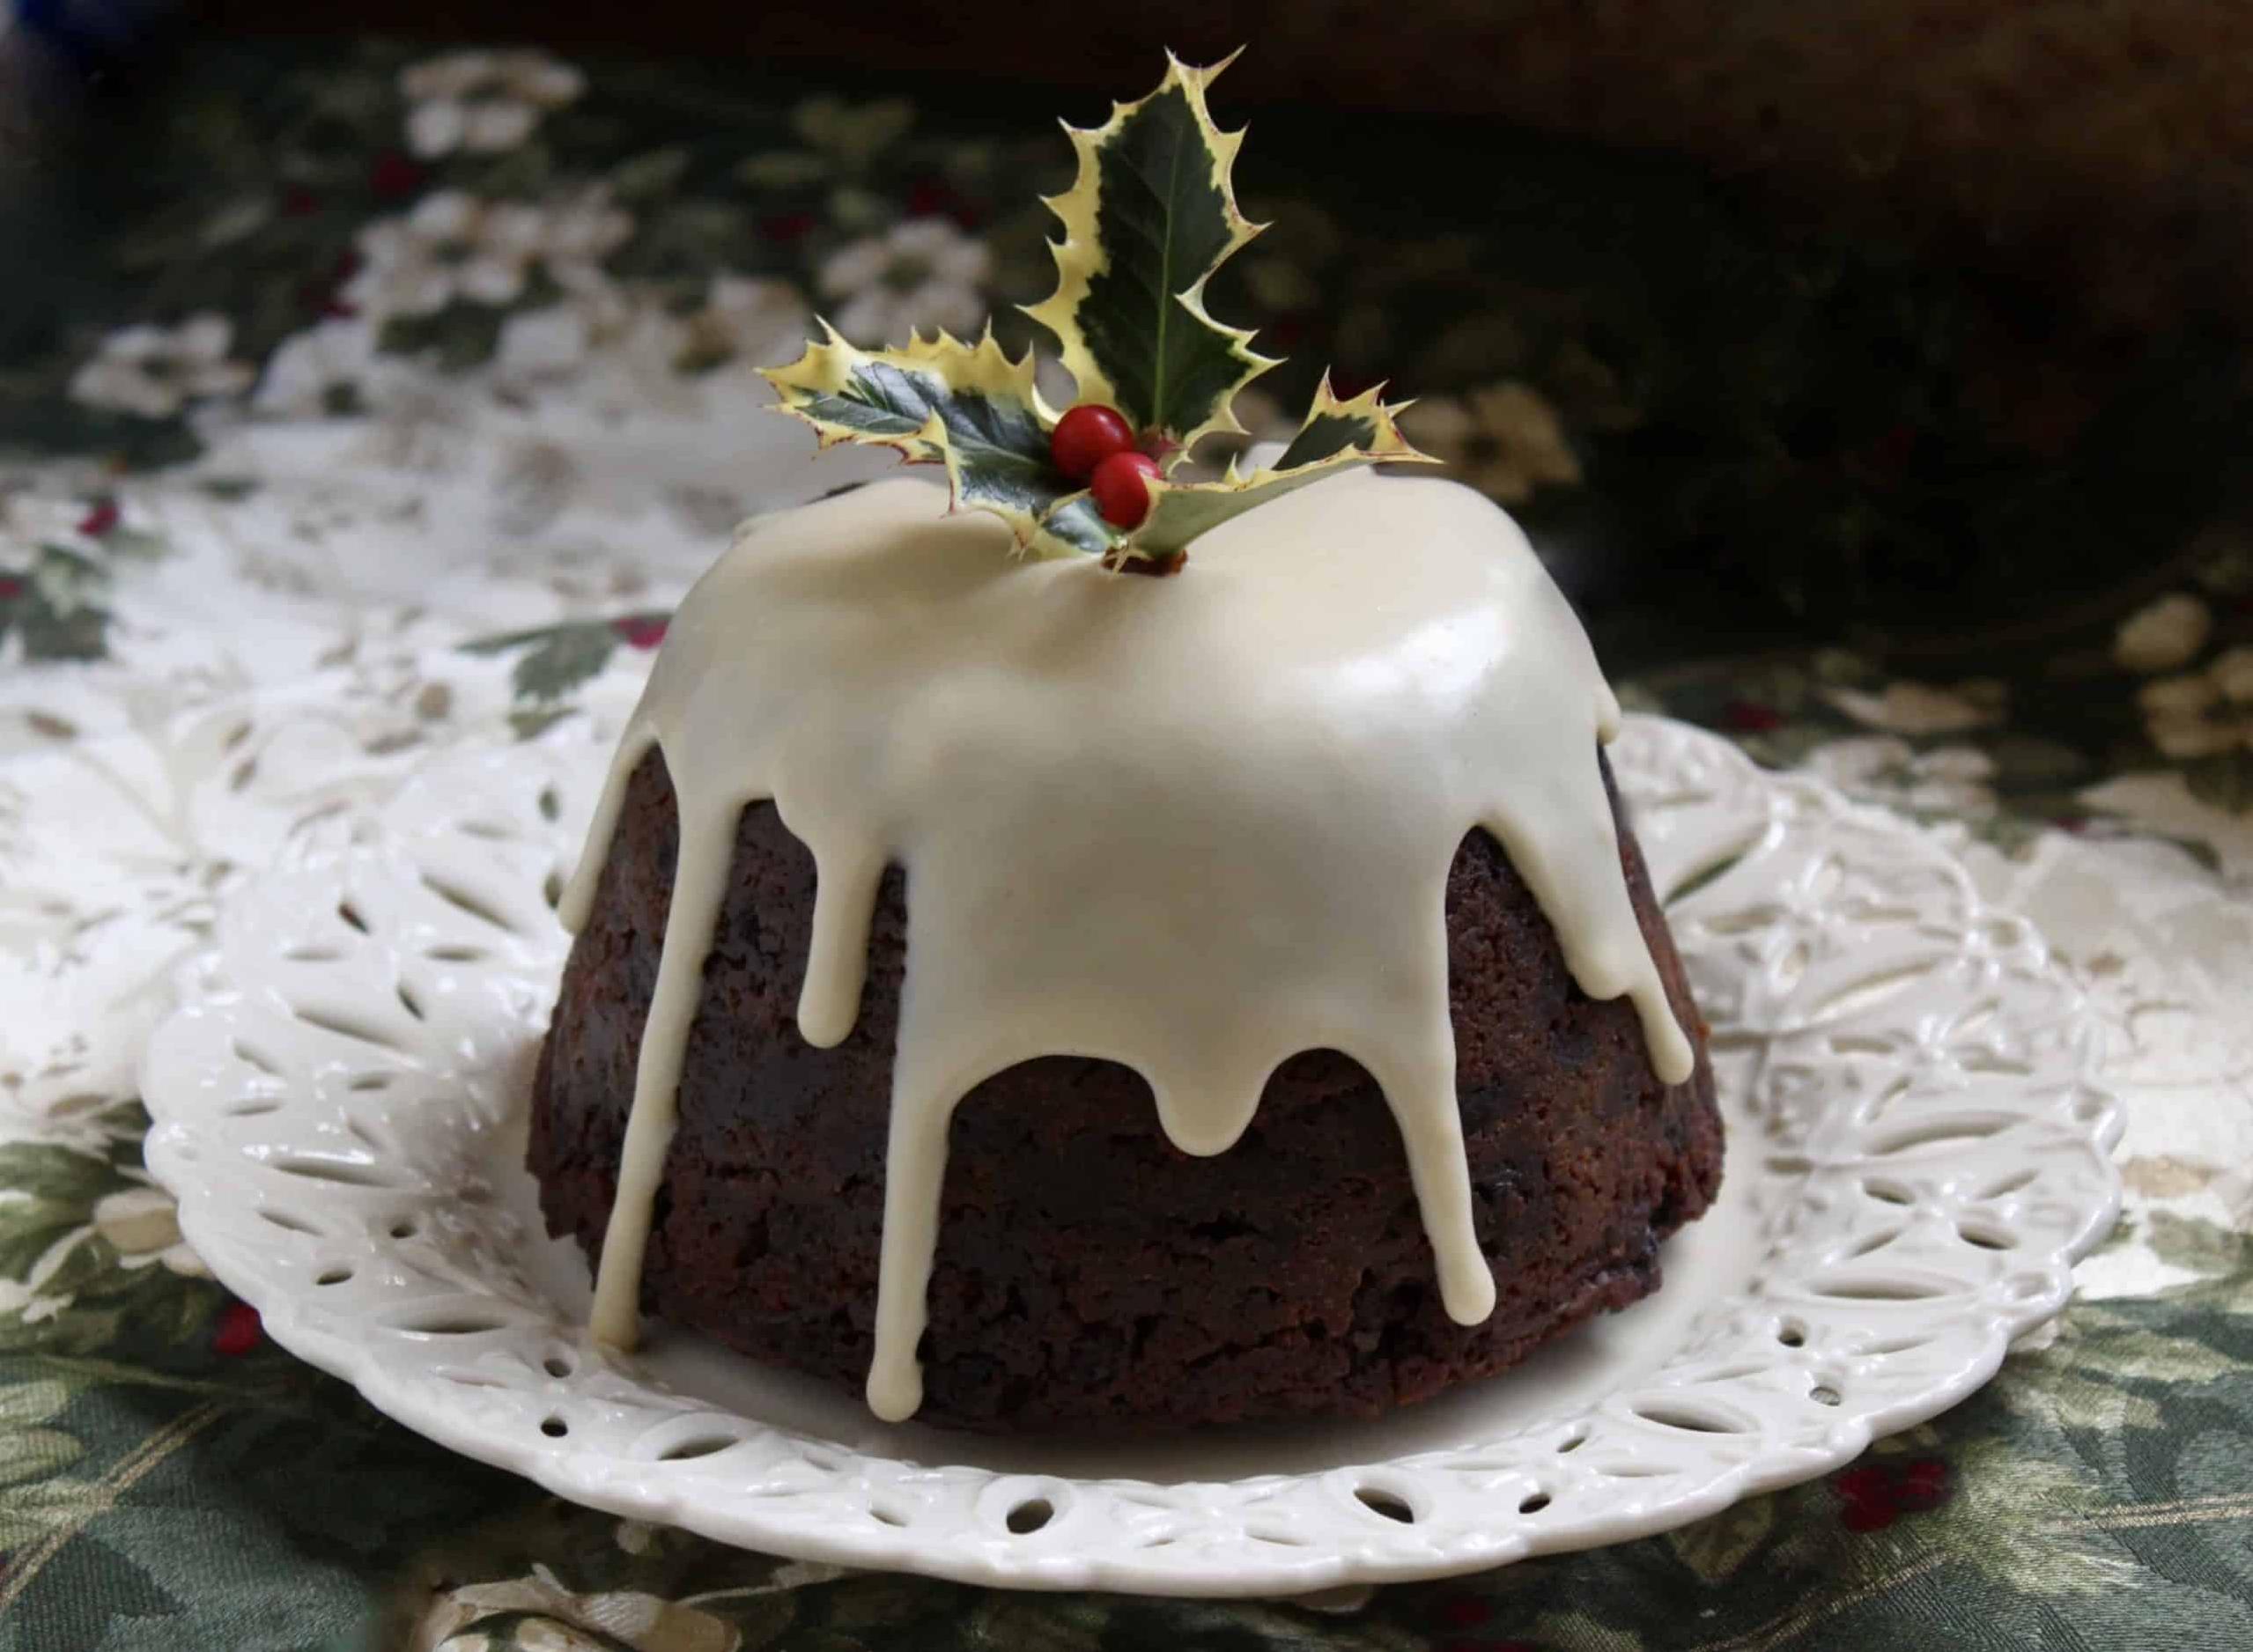  Our English Christmas pudding is made with the finest ingredients to ensure a taste that is both authentic and delicious.